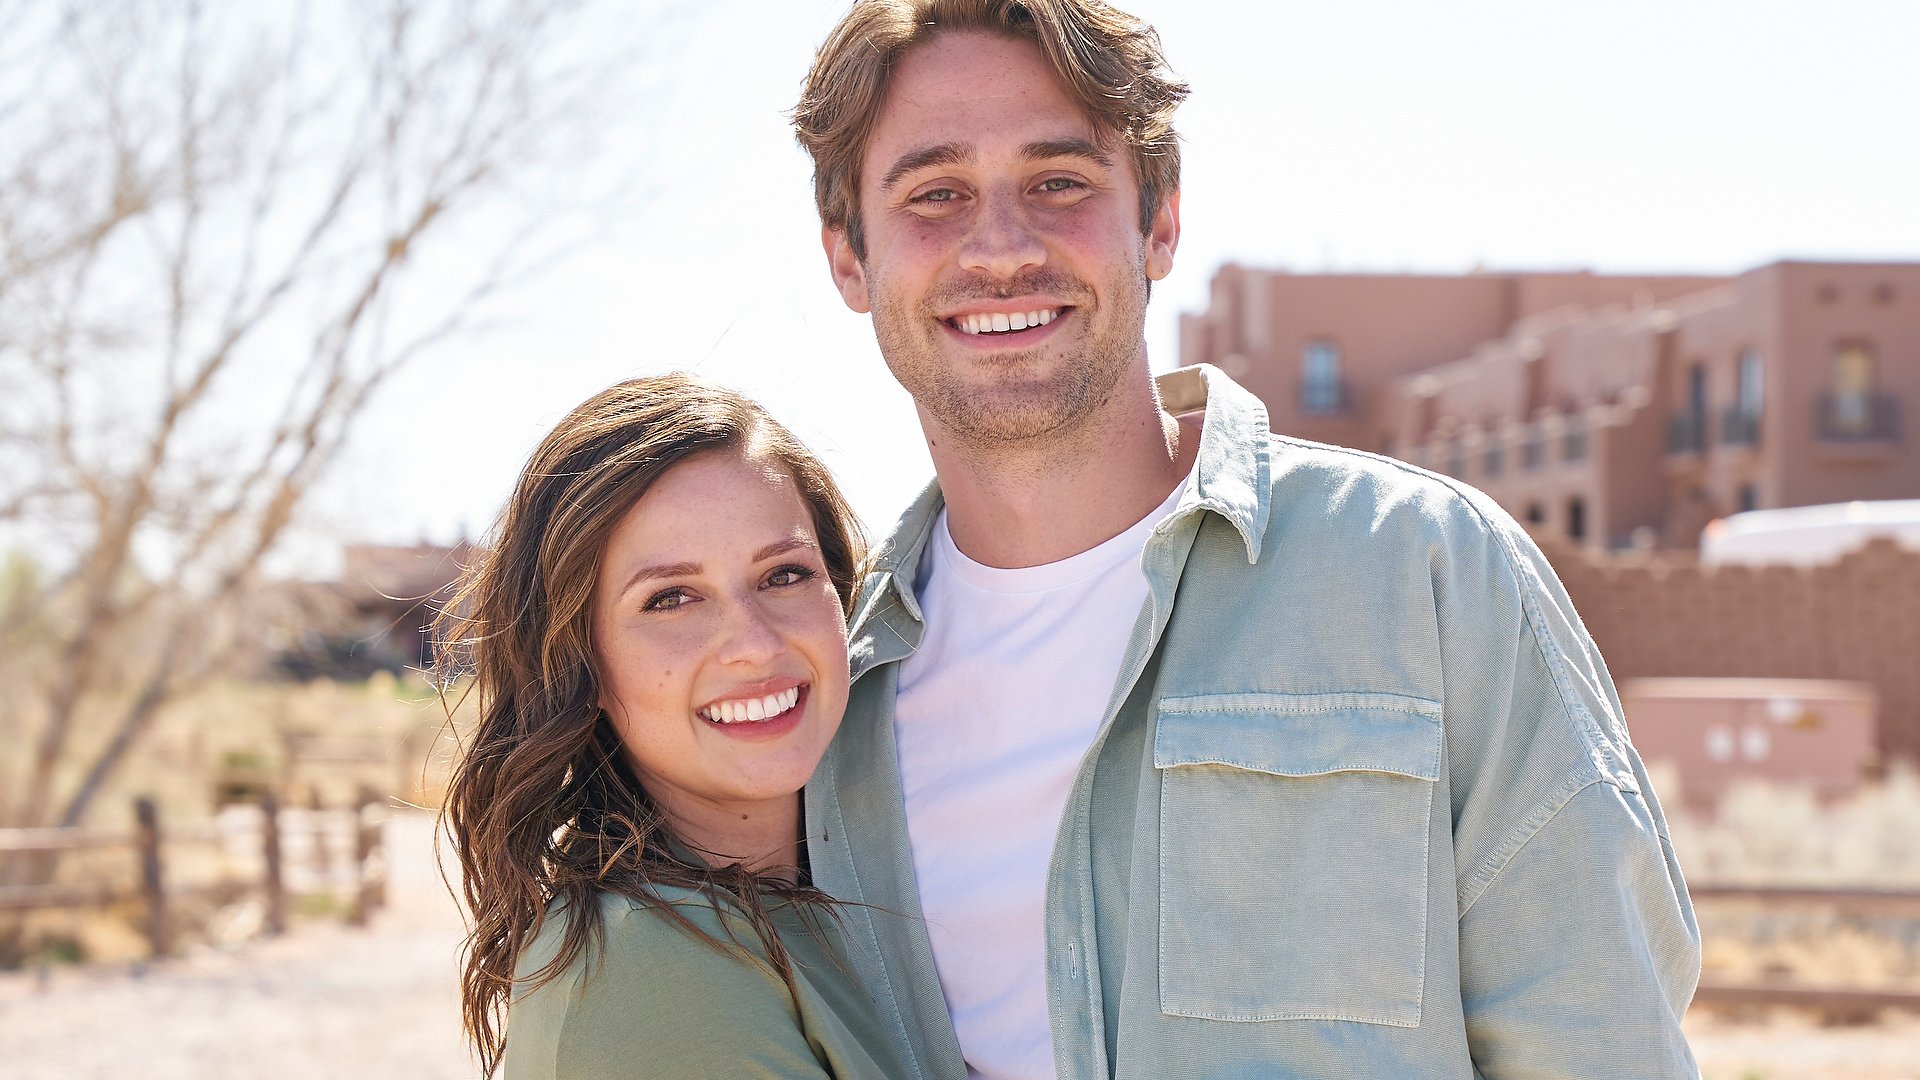 Katie Thurston and Greg Grippo pose together on their second one-on-one date in ‘The Bachelorette’ Season 17 Episode 7